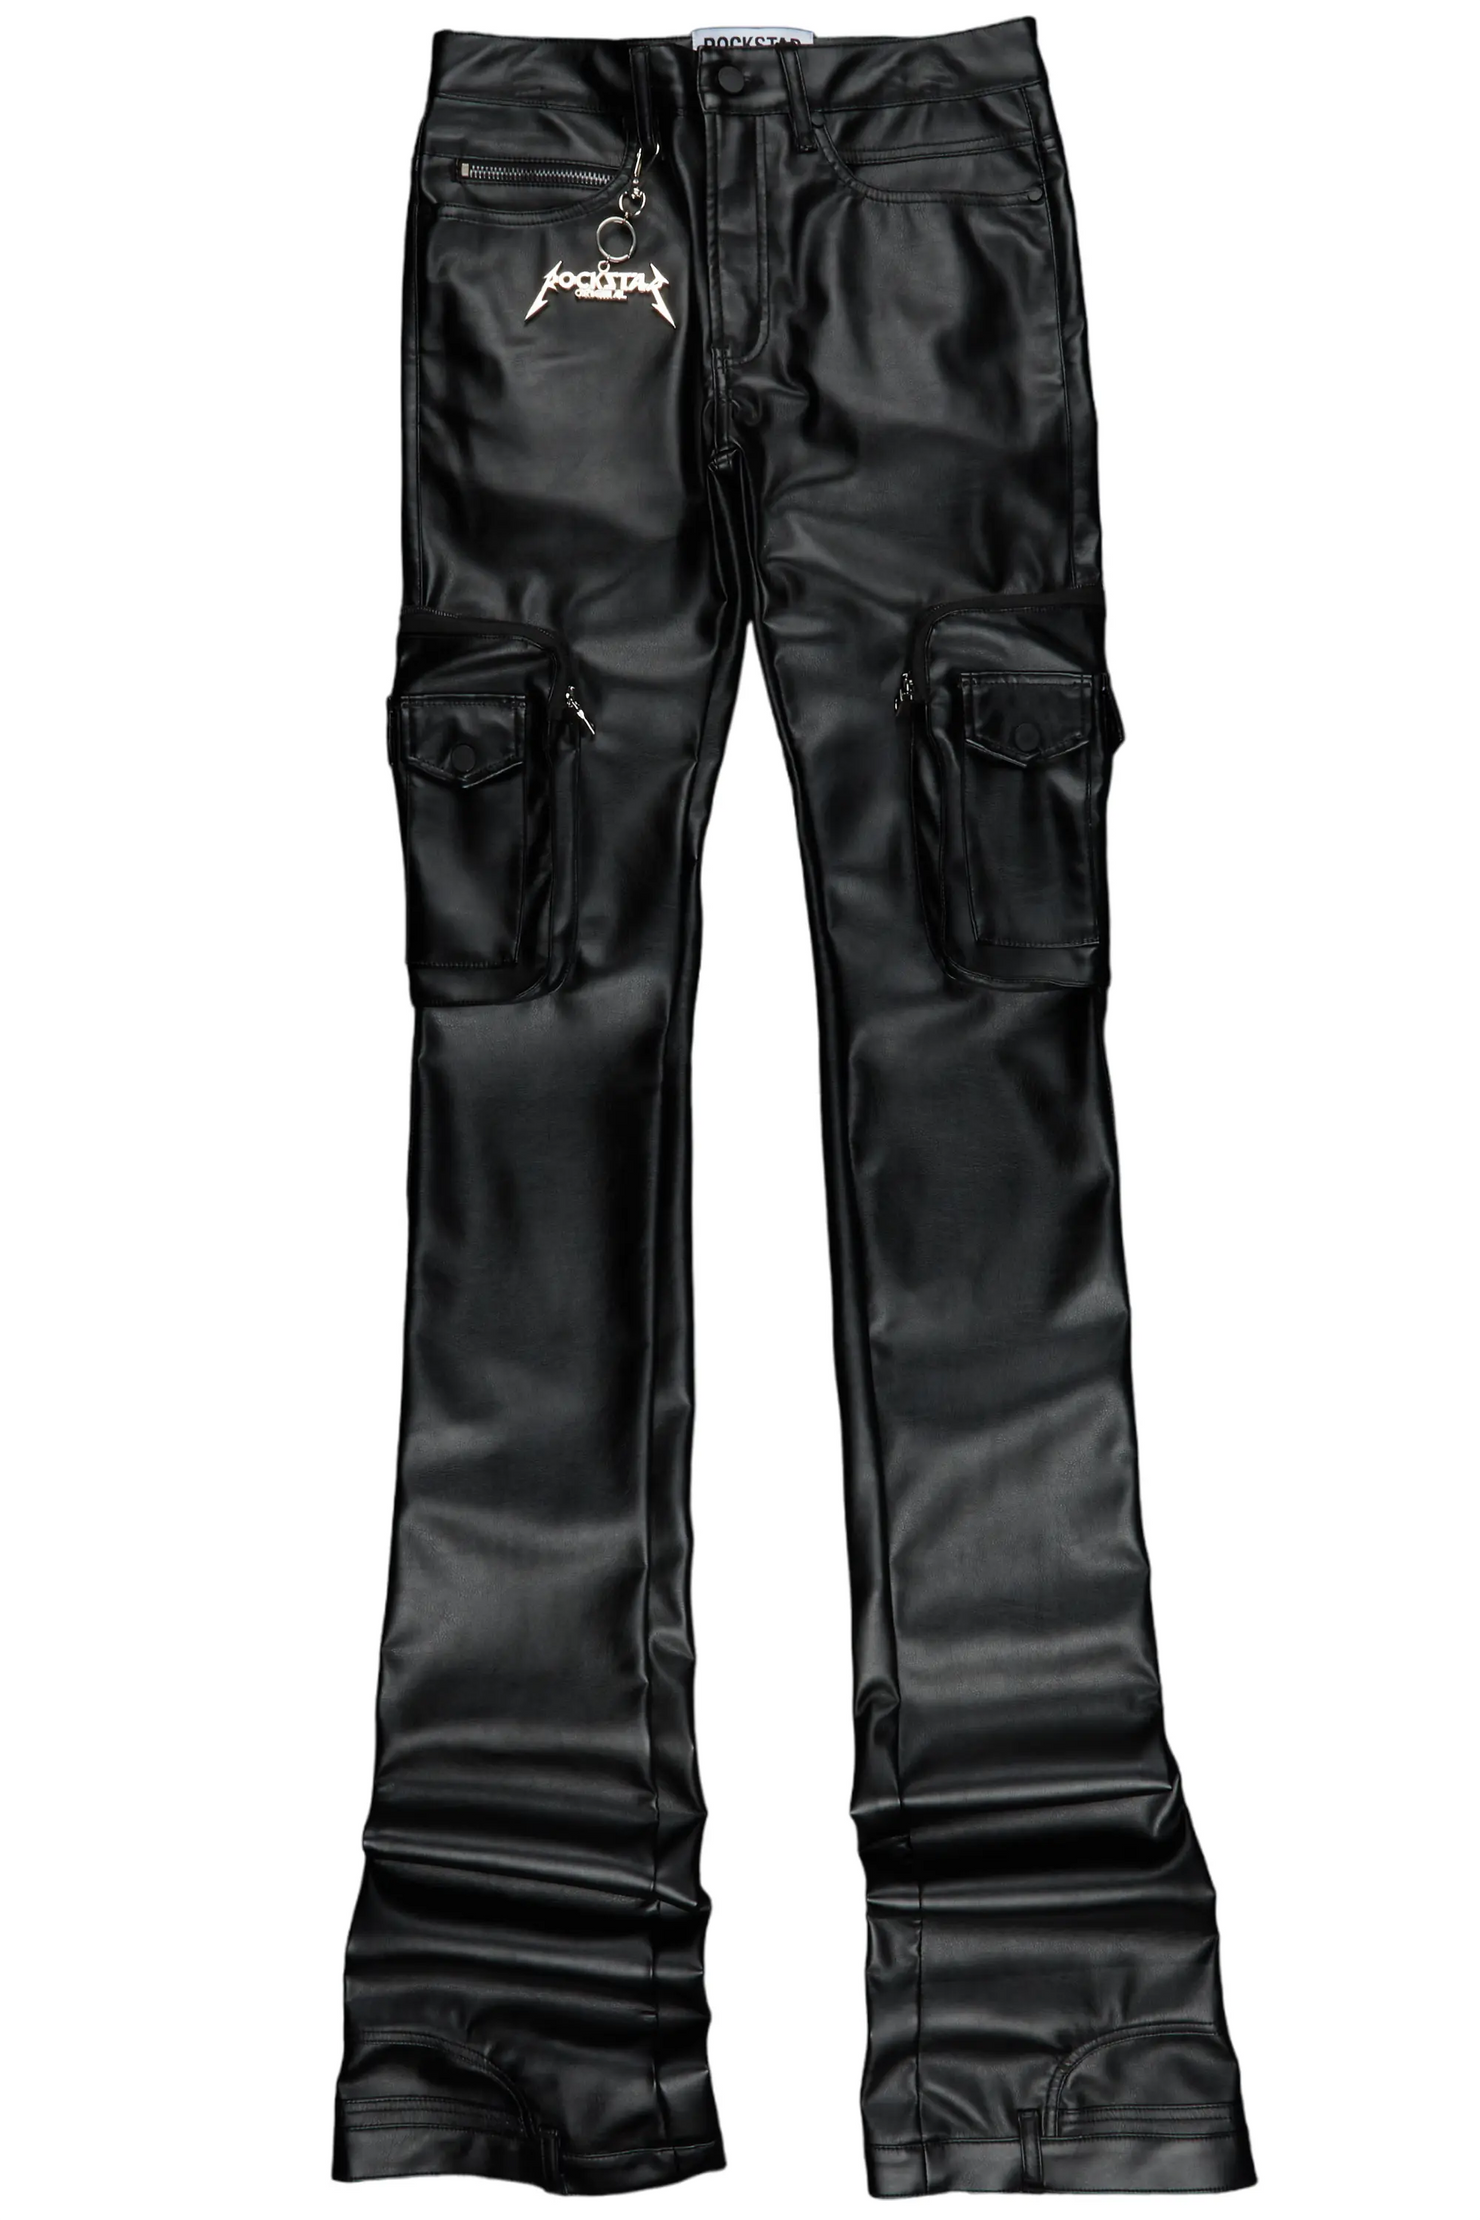 Sutton Black Faux Leather Super Stacked Jean